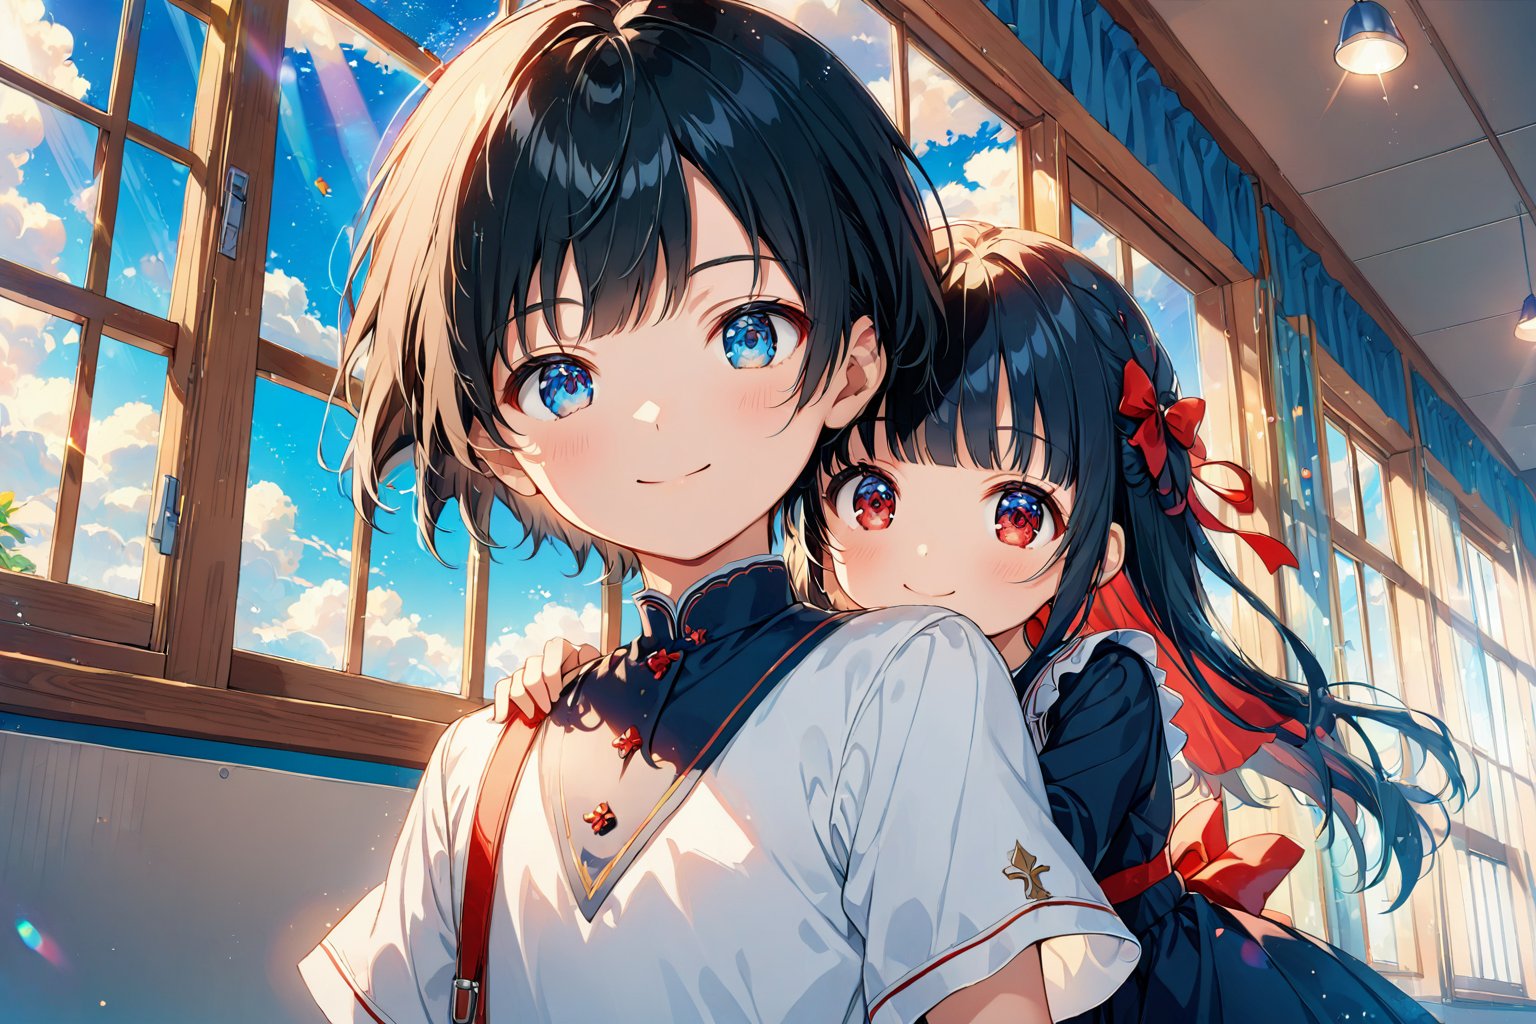 Masterpiece, beautiful details, perfect focus, uniform 8K wallpaper, high resolution, exquisite texture in every detail,
source_anime, Selfie, 
A girl and a boy draw self-portrait with each other., 
(1girl, long black hair, straight bangs, blue eyes, dress, ) , 
(1boy, short white hair, red eyes, ) , Kindergarten, children's garments,
bangs, stand, looking at viewer, celebrate, 1year birthday party,
smile, happy, closed_eyes, 
indoors, school, classroom, window, sky, day, clouds, summer,  
profile, lens flare, glitter,  glint,  light